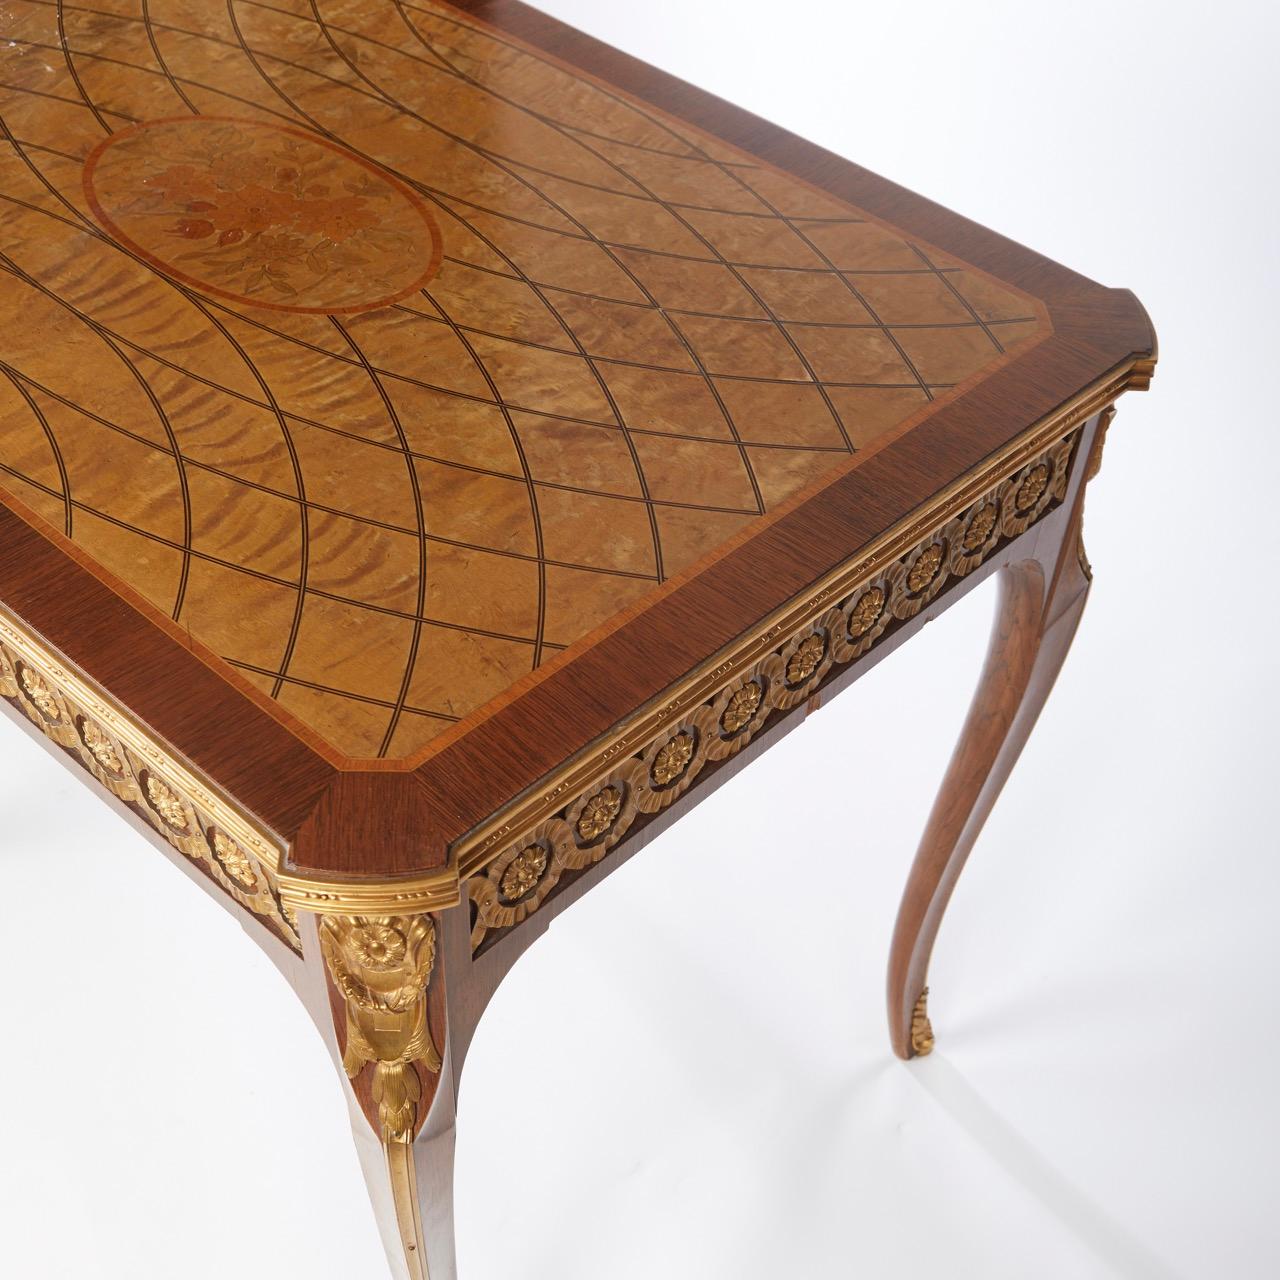 A French Louis XVI-style center table/console table. The apron with inset cast brass guilloché pattern frize below a marquetry inlaid top with bronze edge. The transitional-style legs (Louis XV-XVI) having bronze sabouxes. By Nordiska Kompaniet,